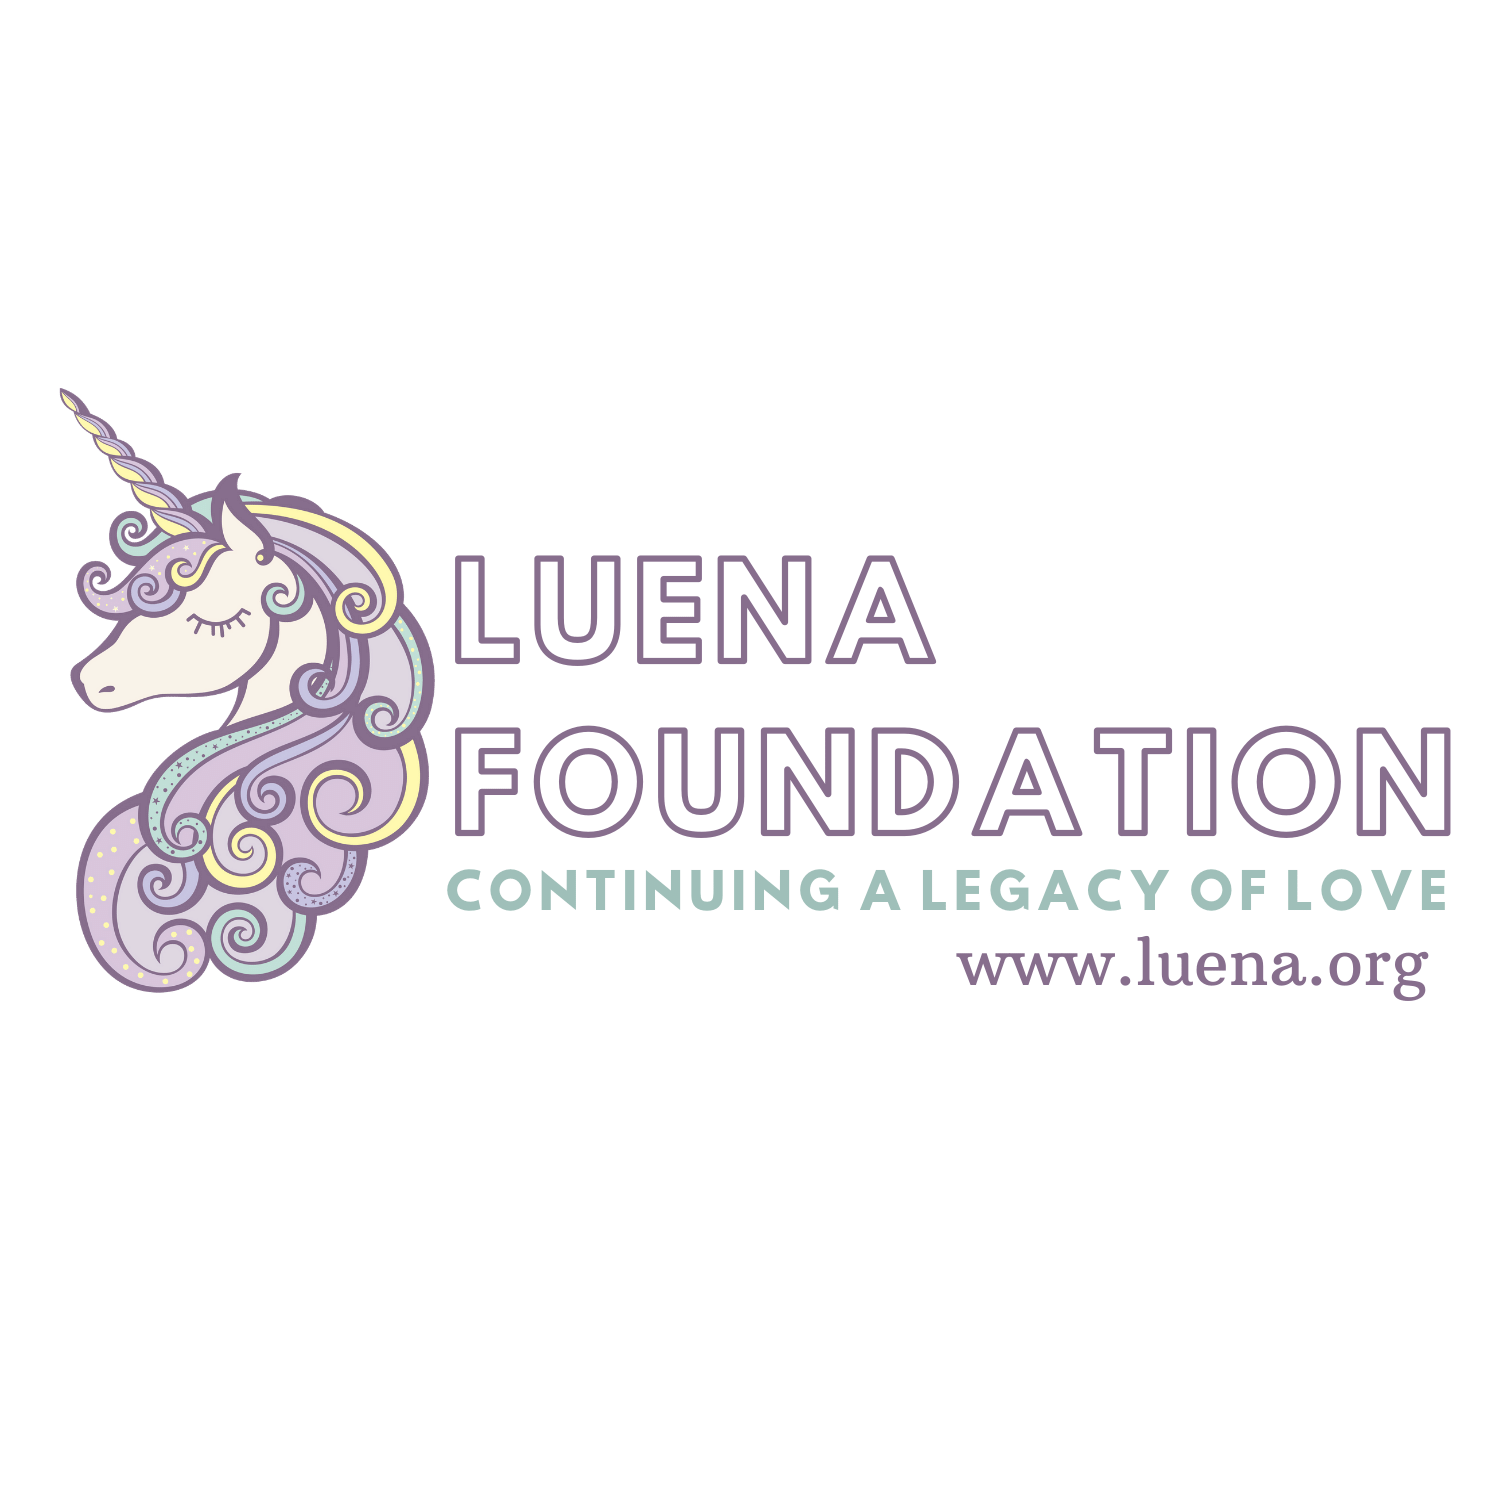 luena foundation from united state donate